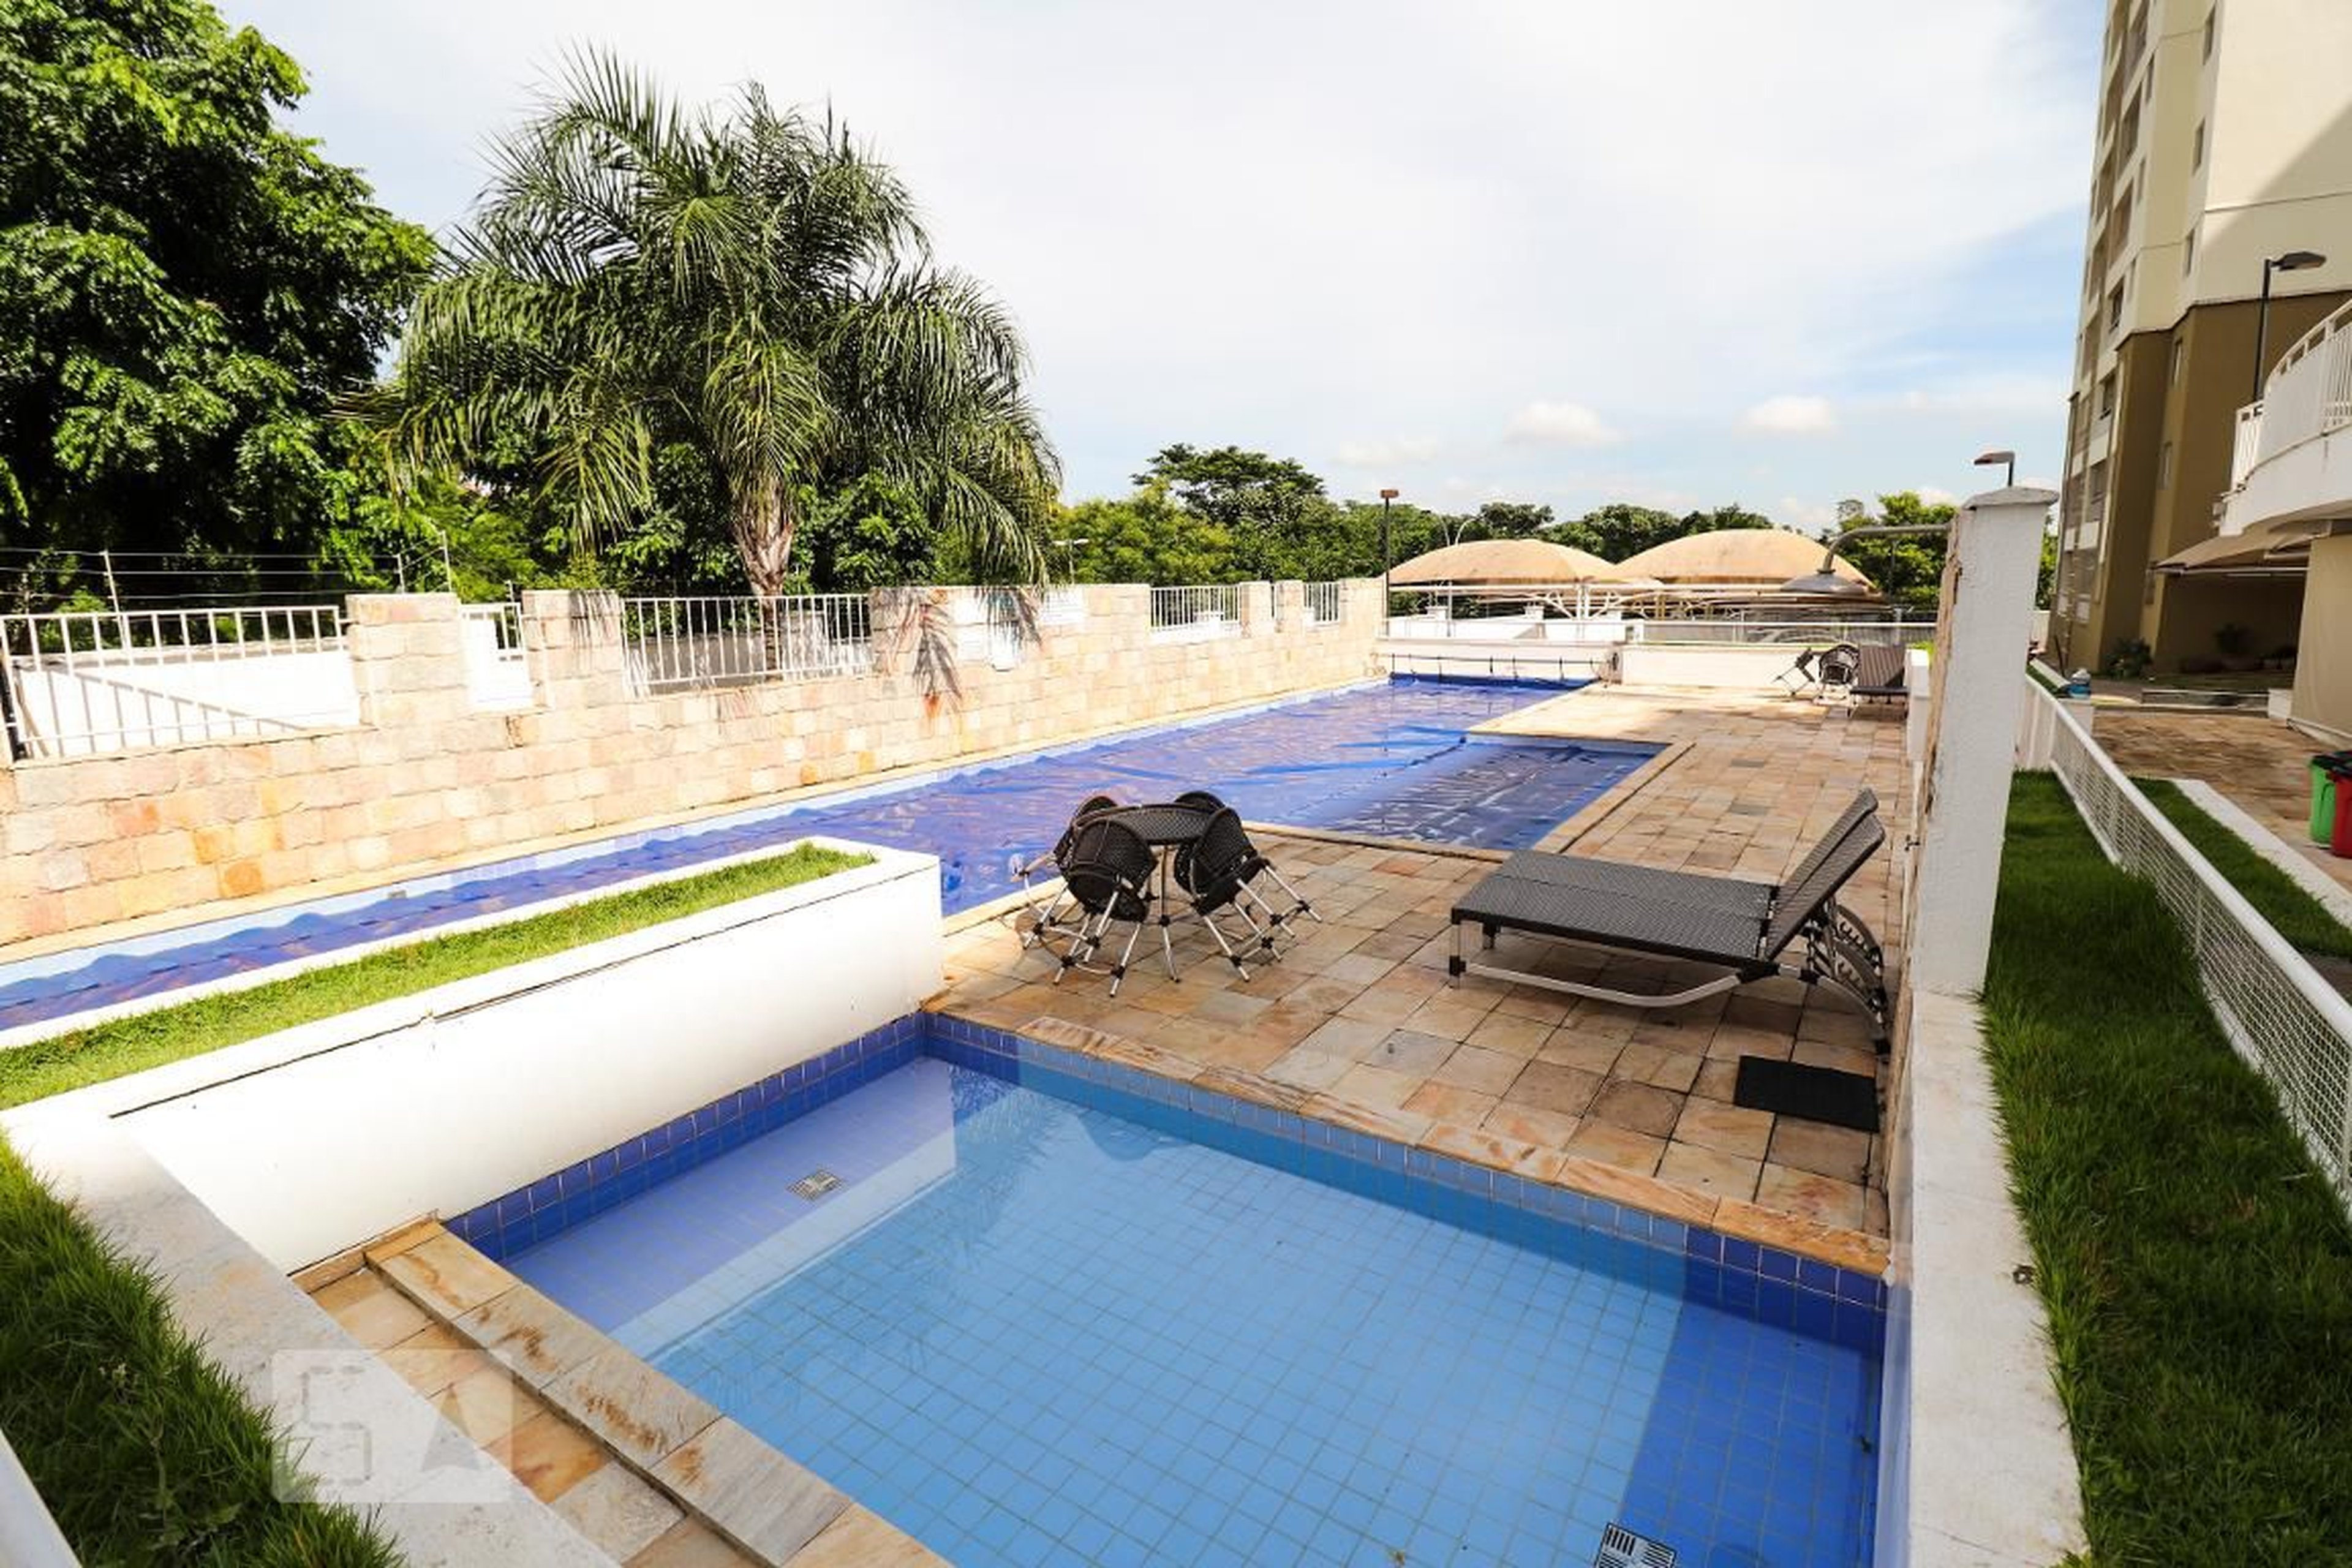 Piscina - Ambient Park Residencial